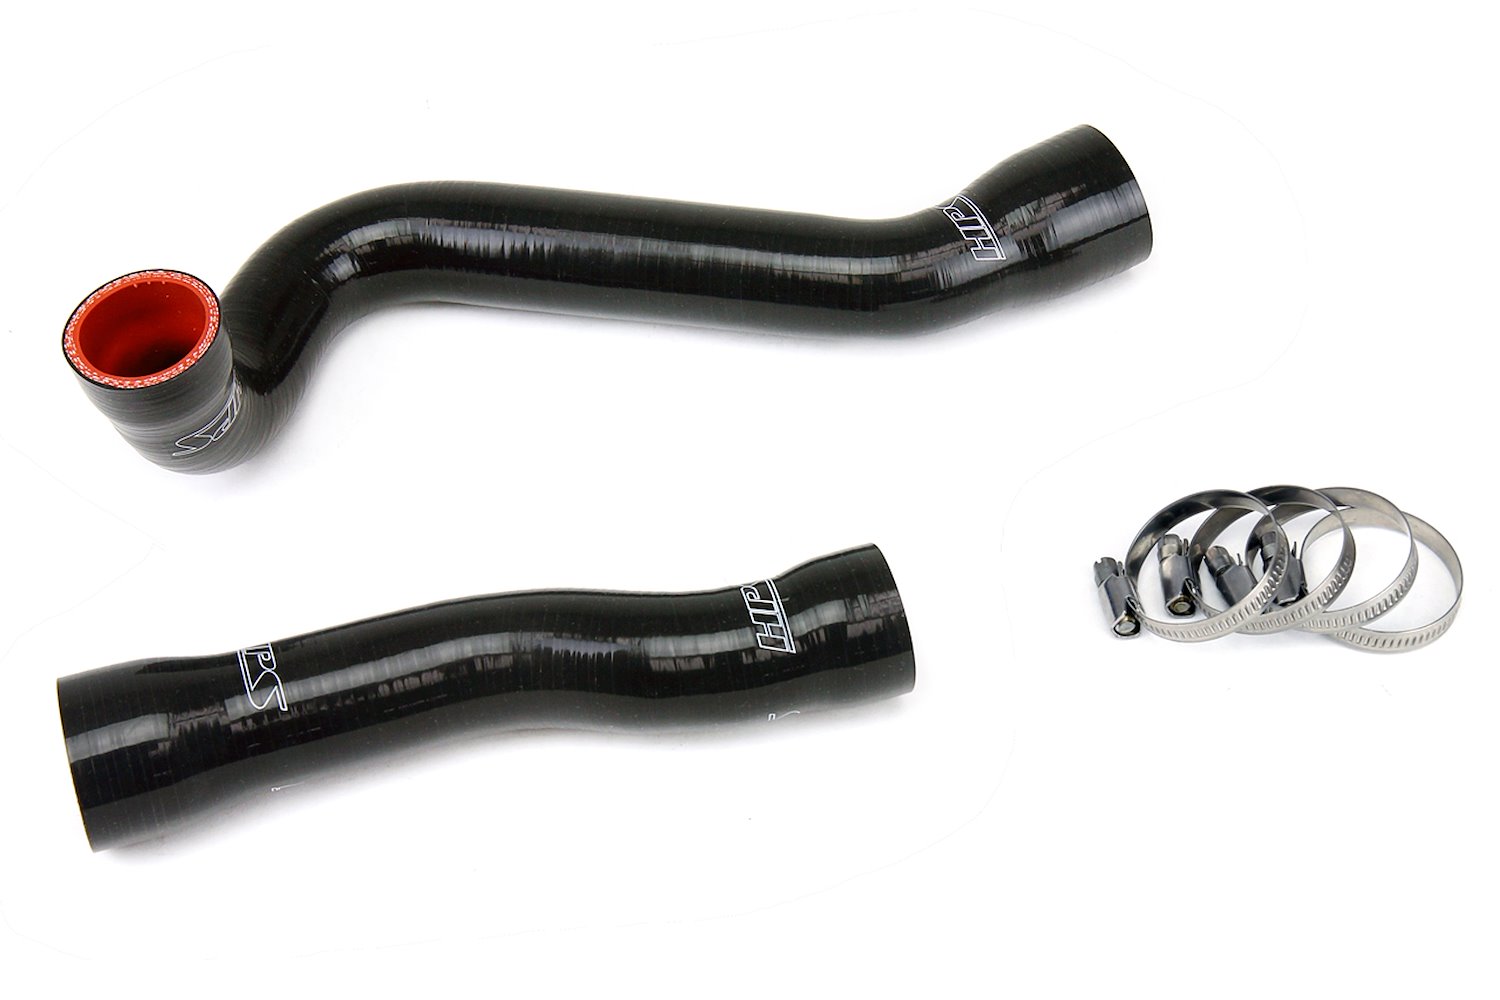 57-1008-BLK Radiator Hose Kit, High-Temp 3-Ply Reinforced Silicone, Replace OEM Rubber Radiator Coolant Hoses